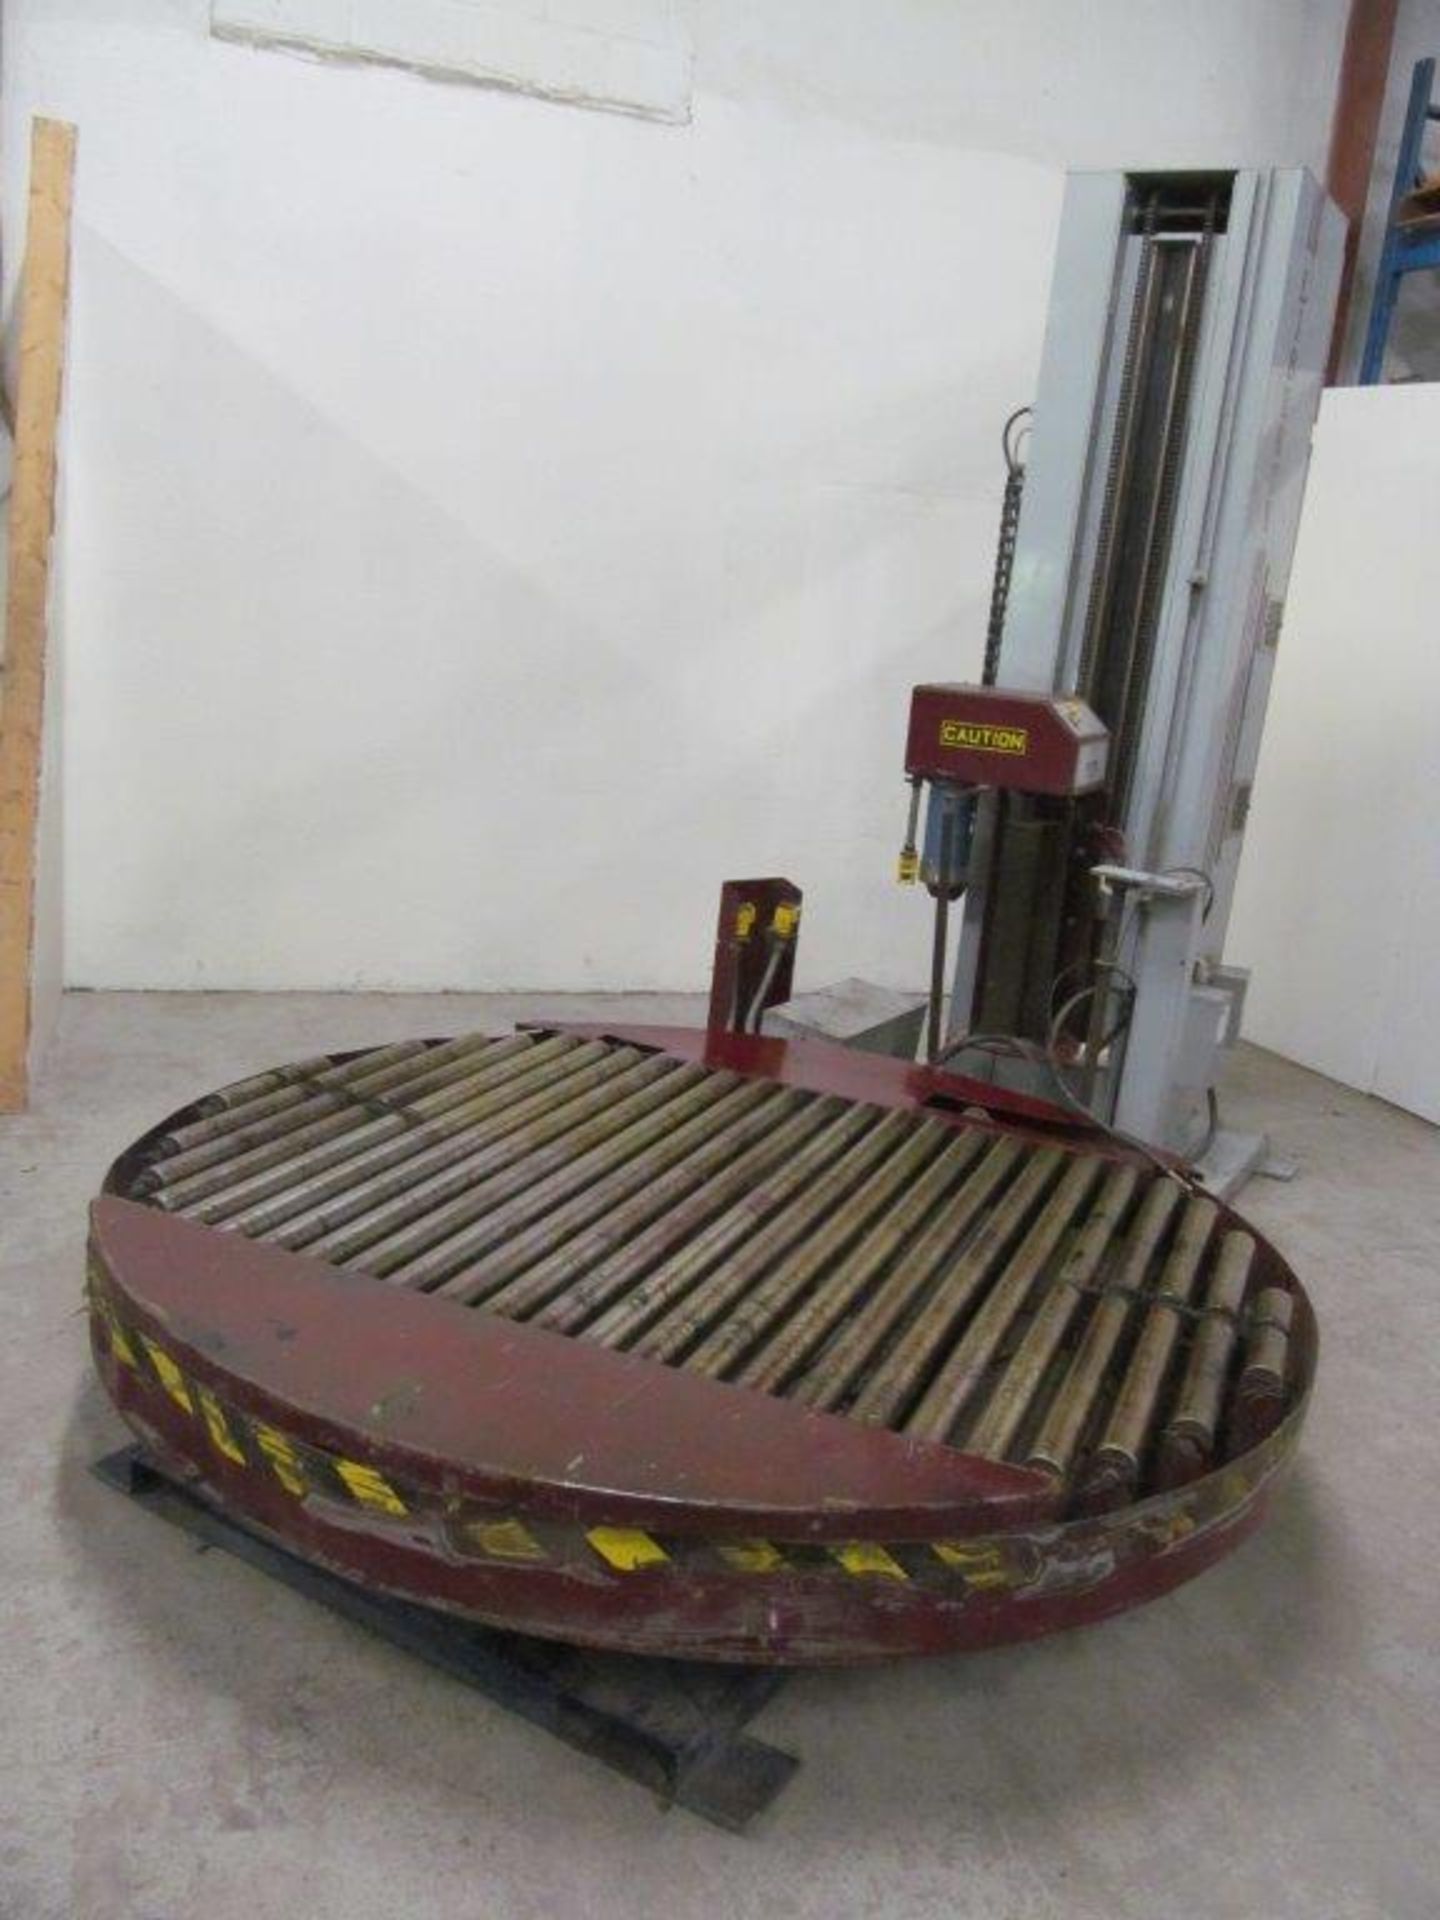 LIBERTY (USA) STRETCH WRAPPER SERIES 700A, 7FT DIAMETER TABLE, (CONDITION UNKNOWN)